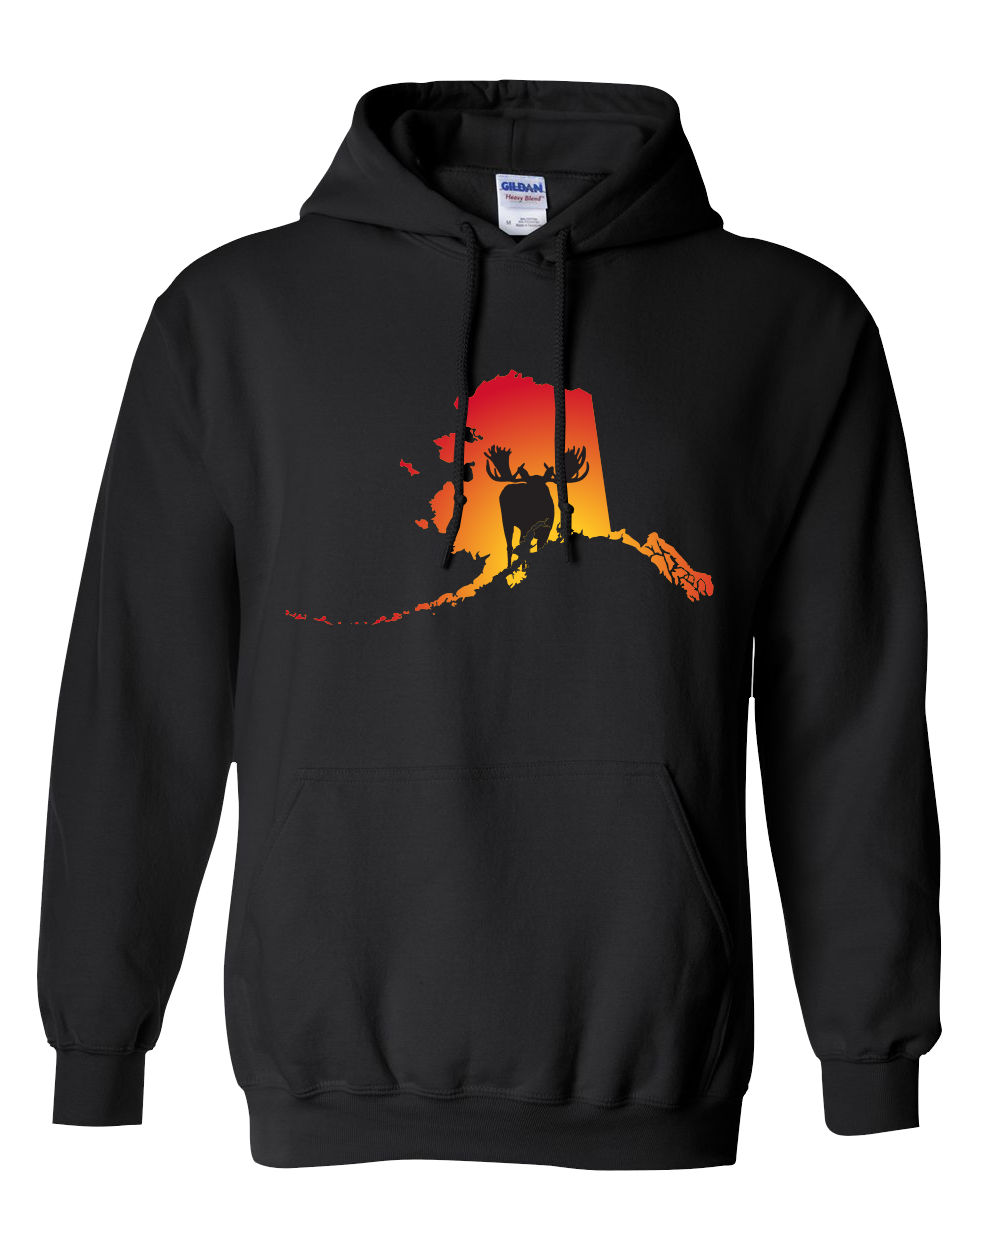 Pullover Hooded Sweatshirt Alaska Black Moose Vibrant Design High Quality Tight Knit Ring Spun Low Maintenance Cotton Printed With The Newest Available Color Transfer Technology